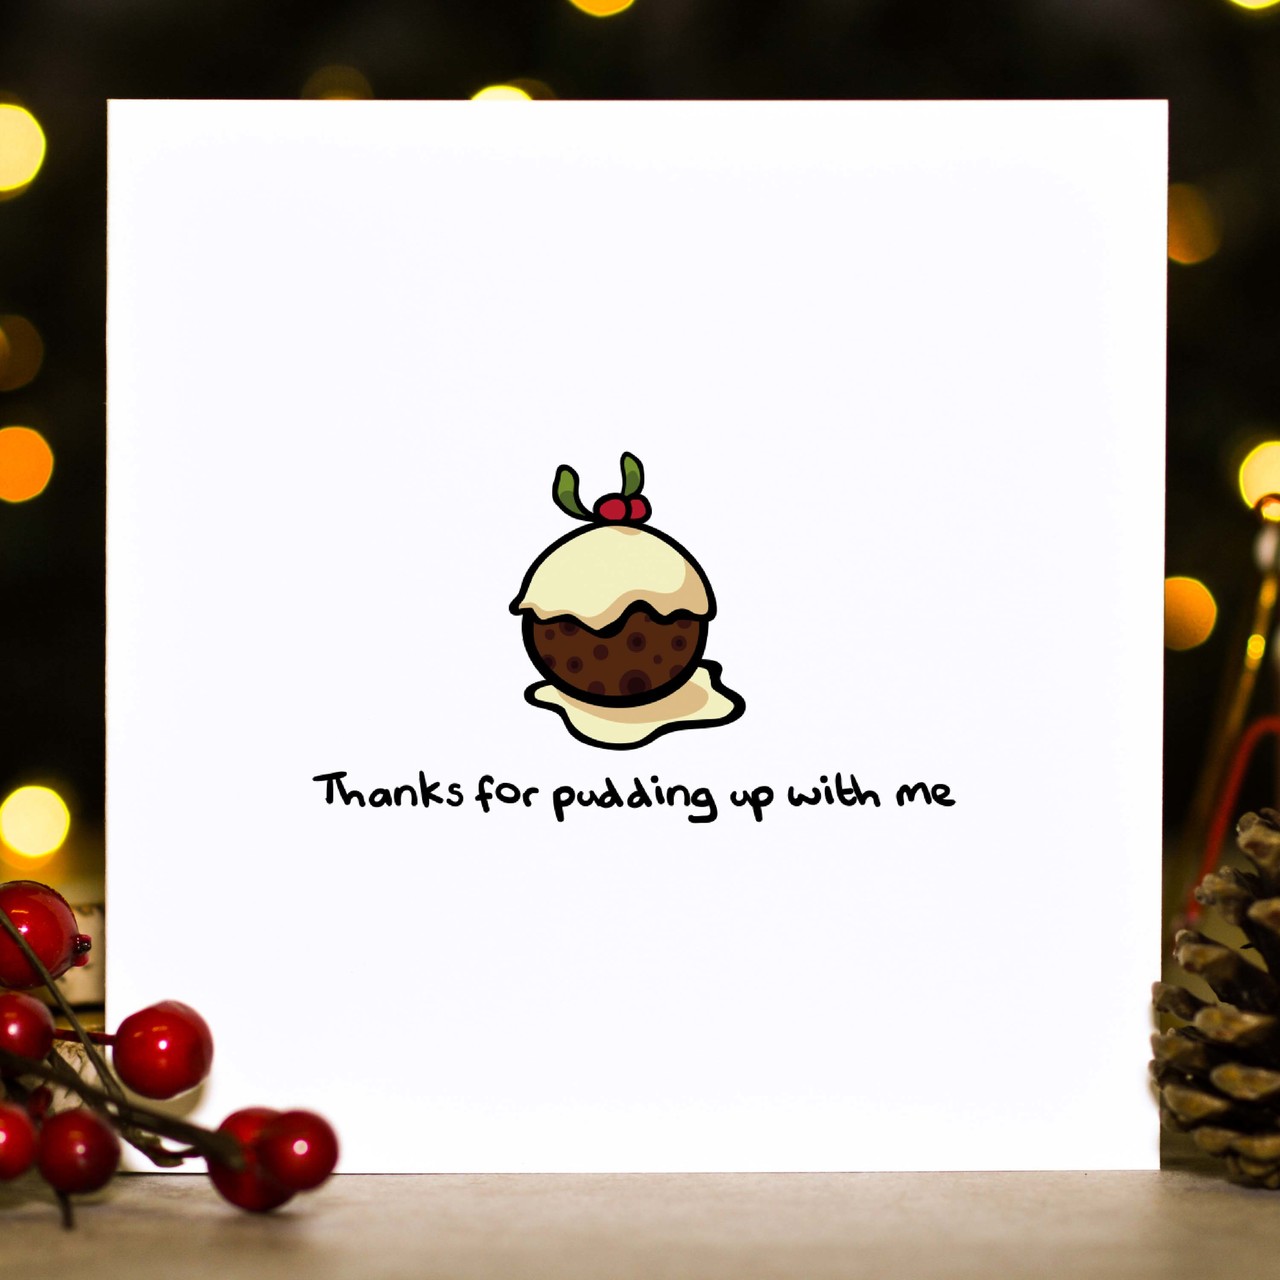 Thanks for pudding up with me Christmas Card